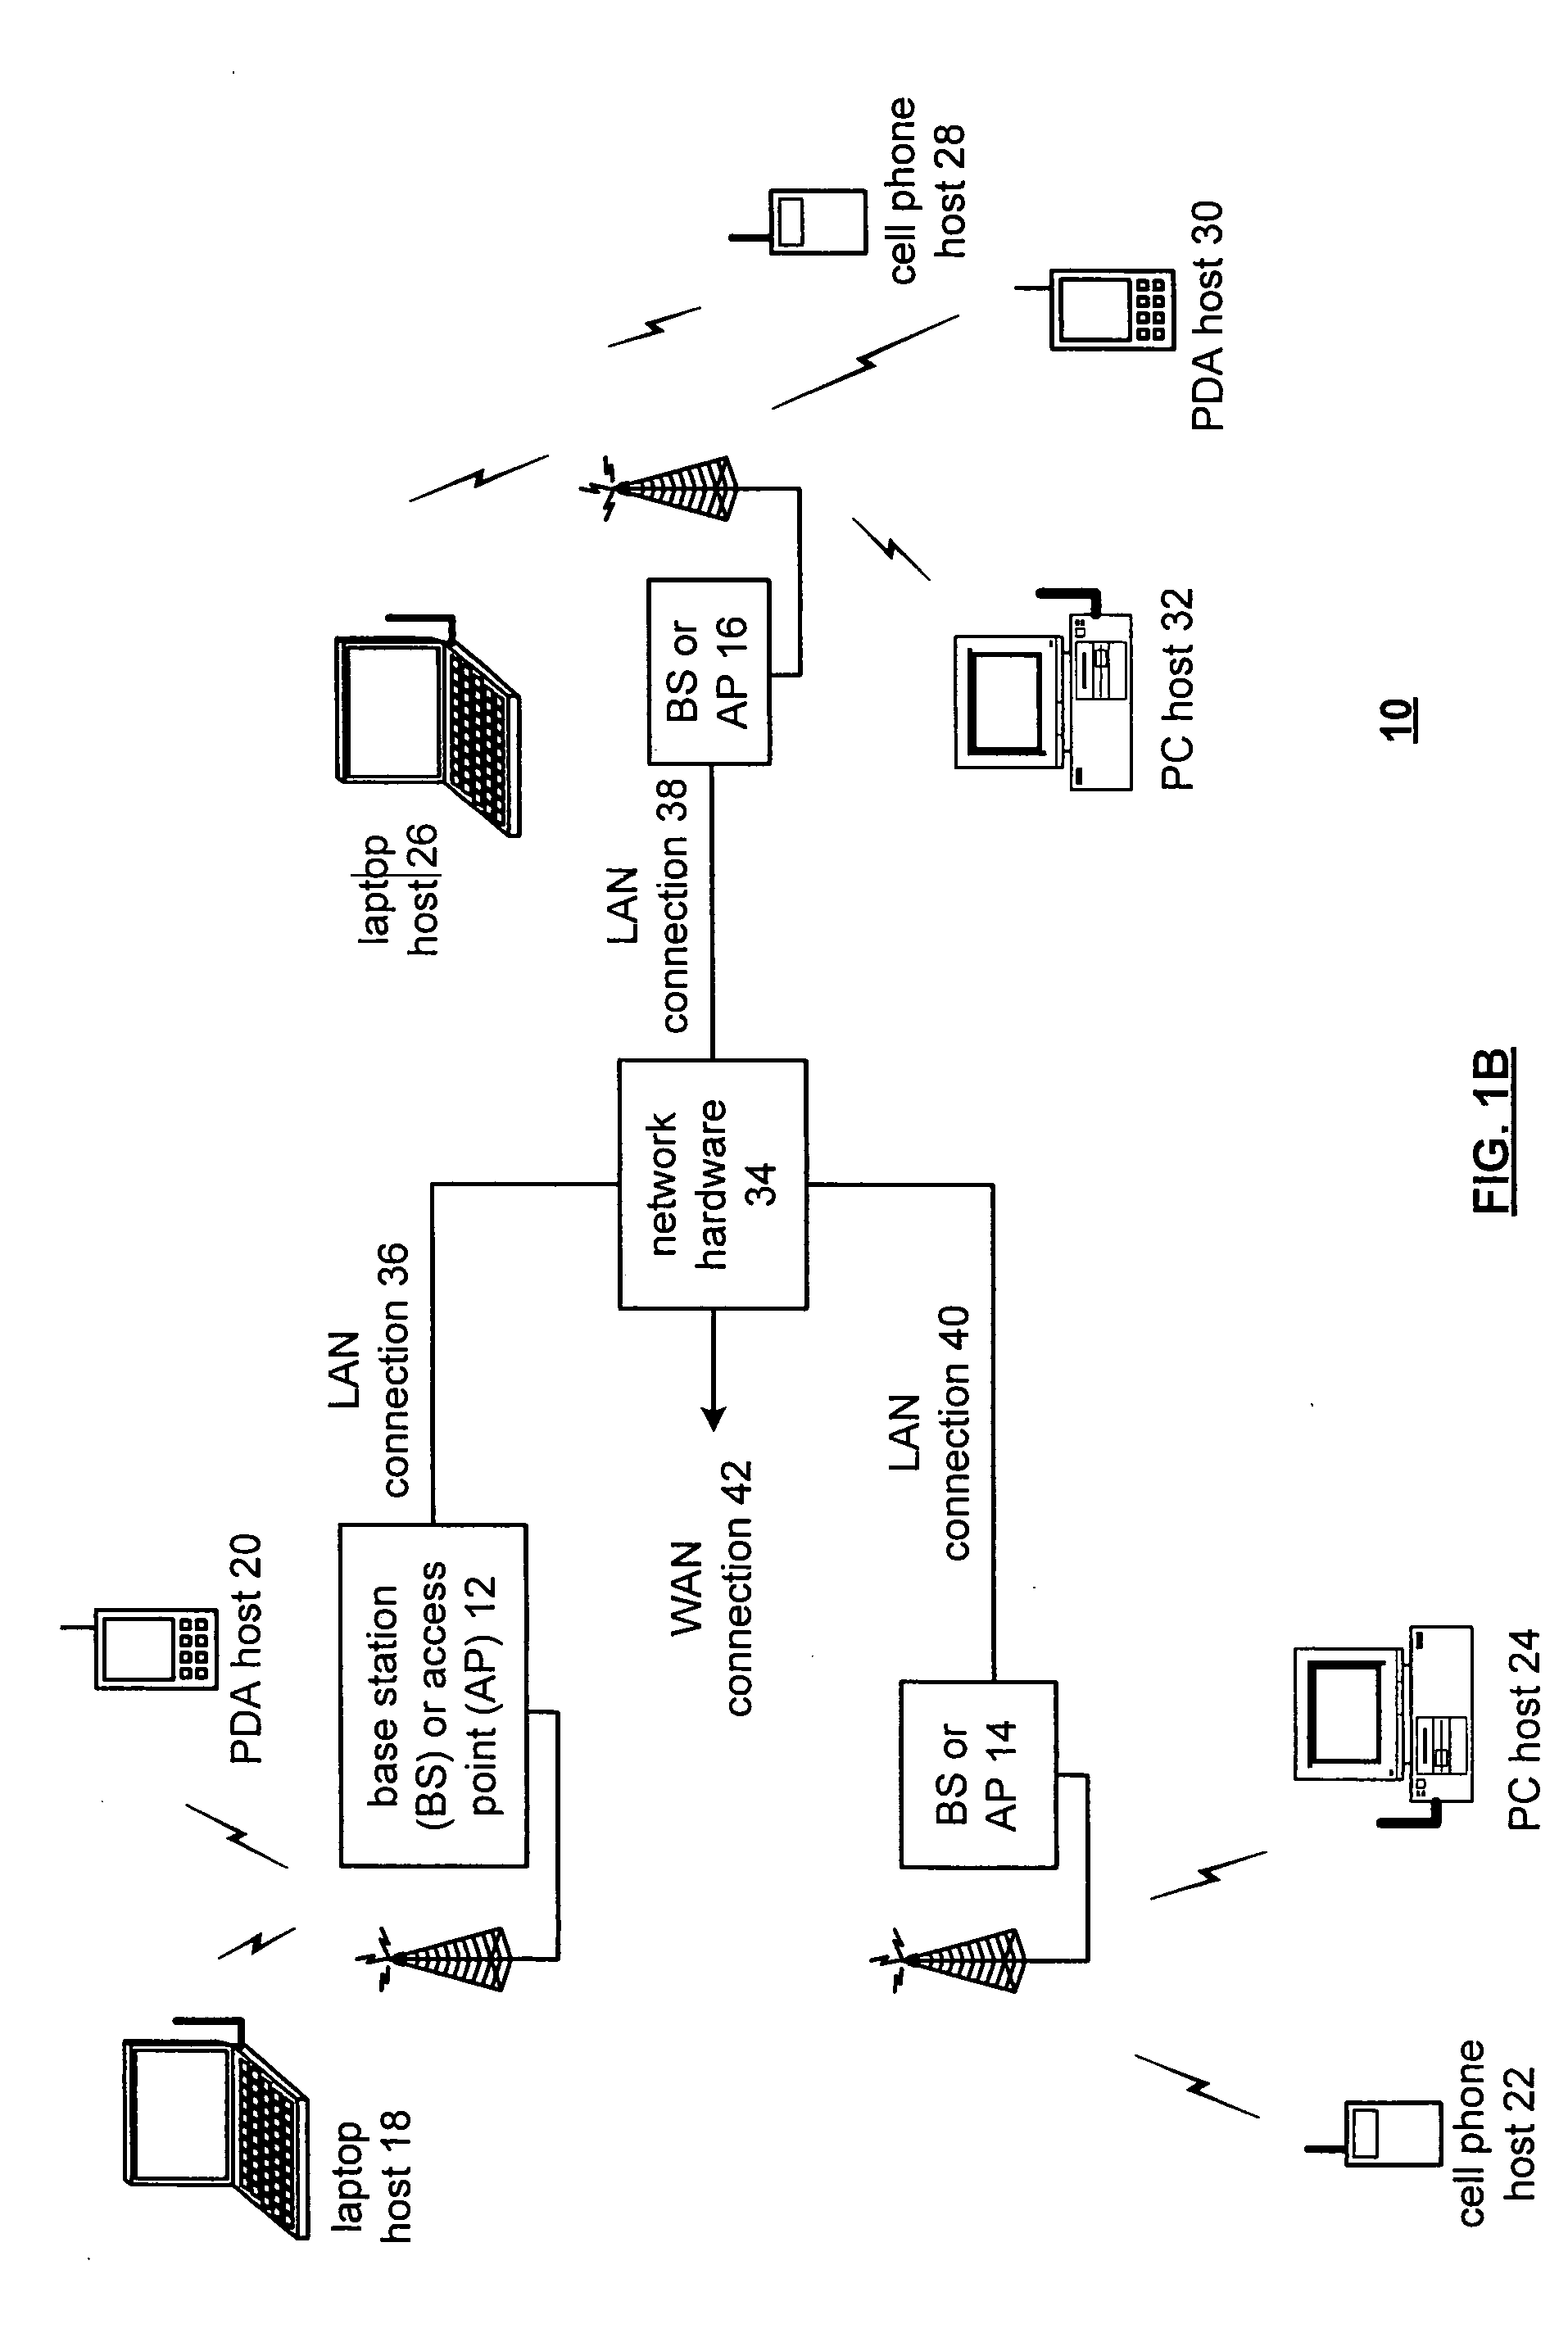 Method and system for using PSK sync word for fine tuning frequency adjustment